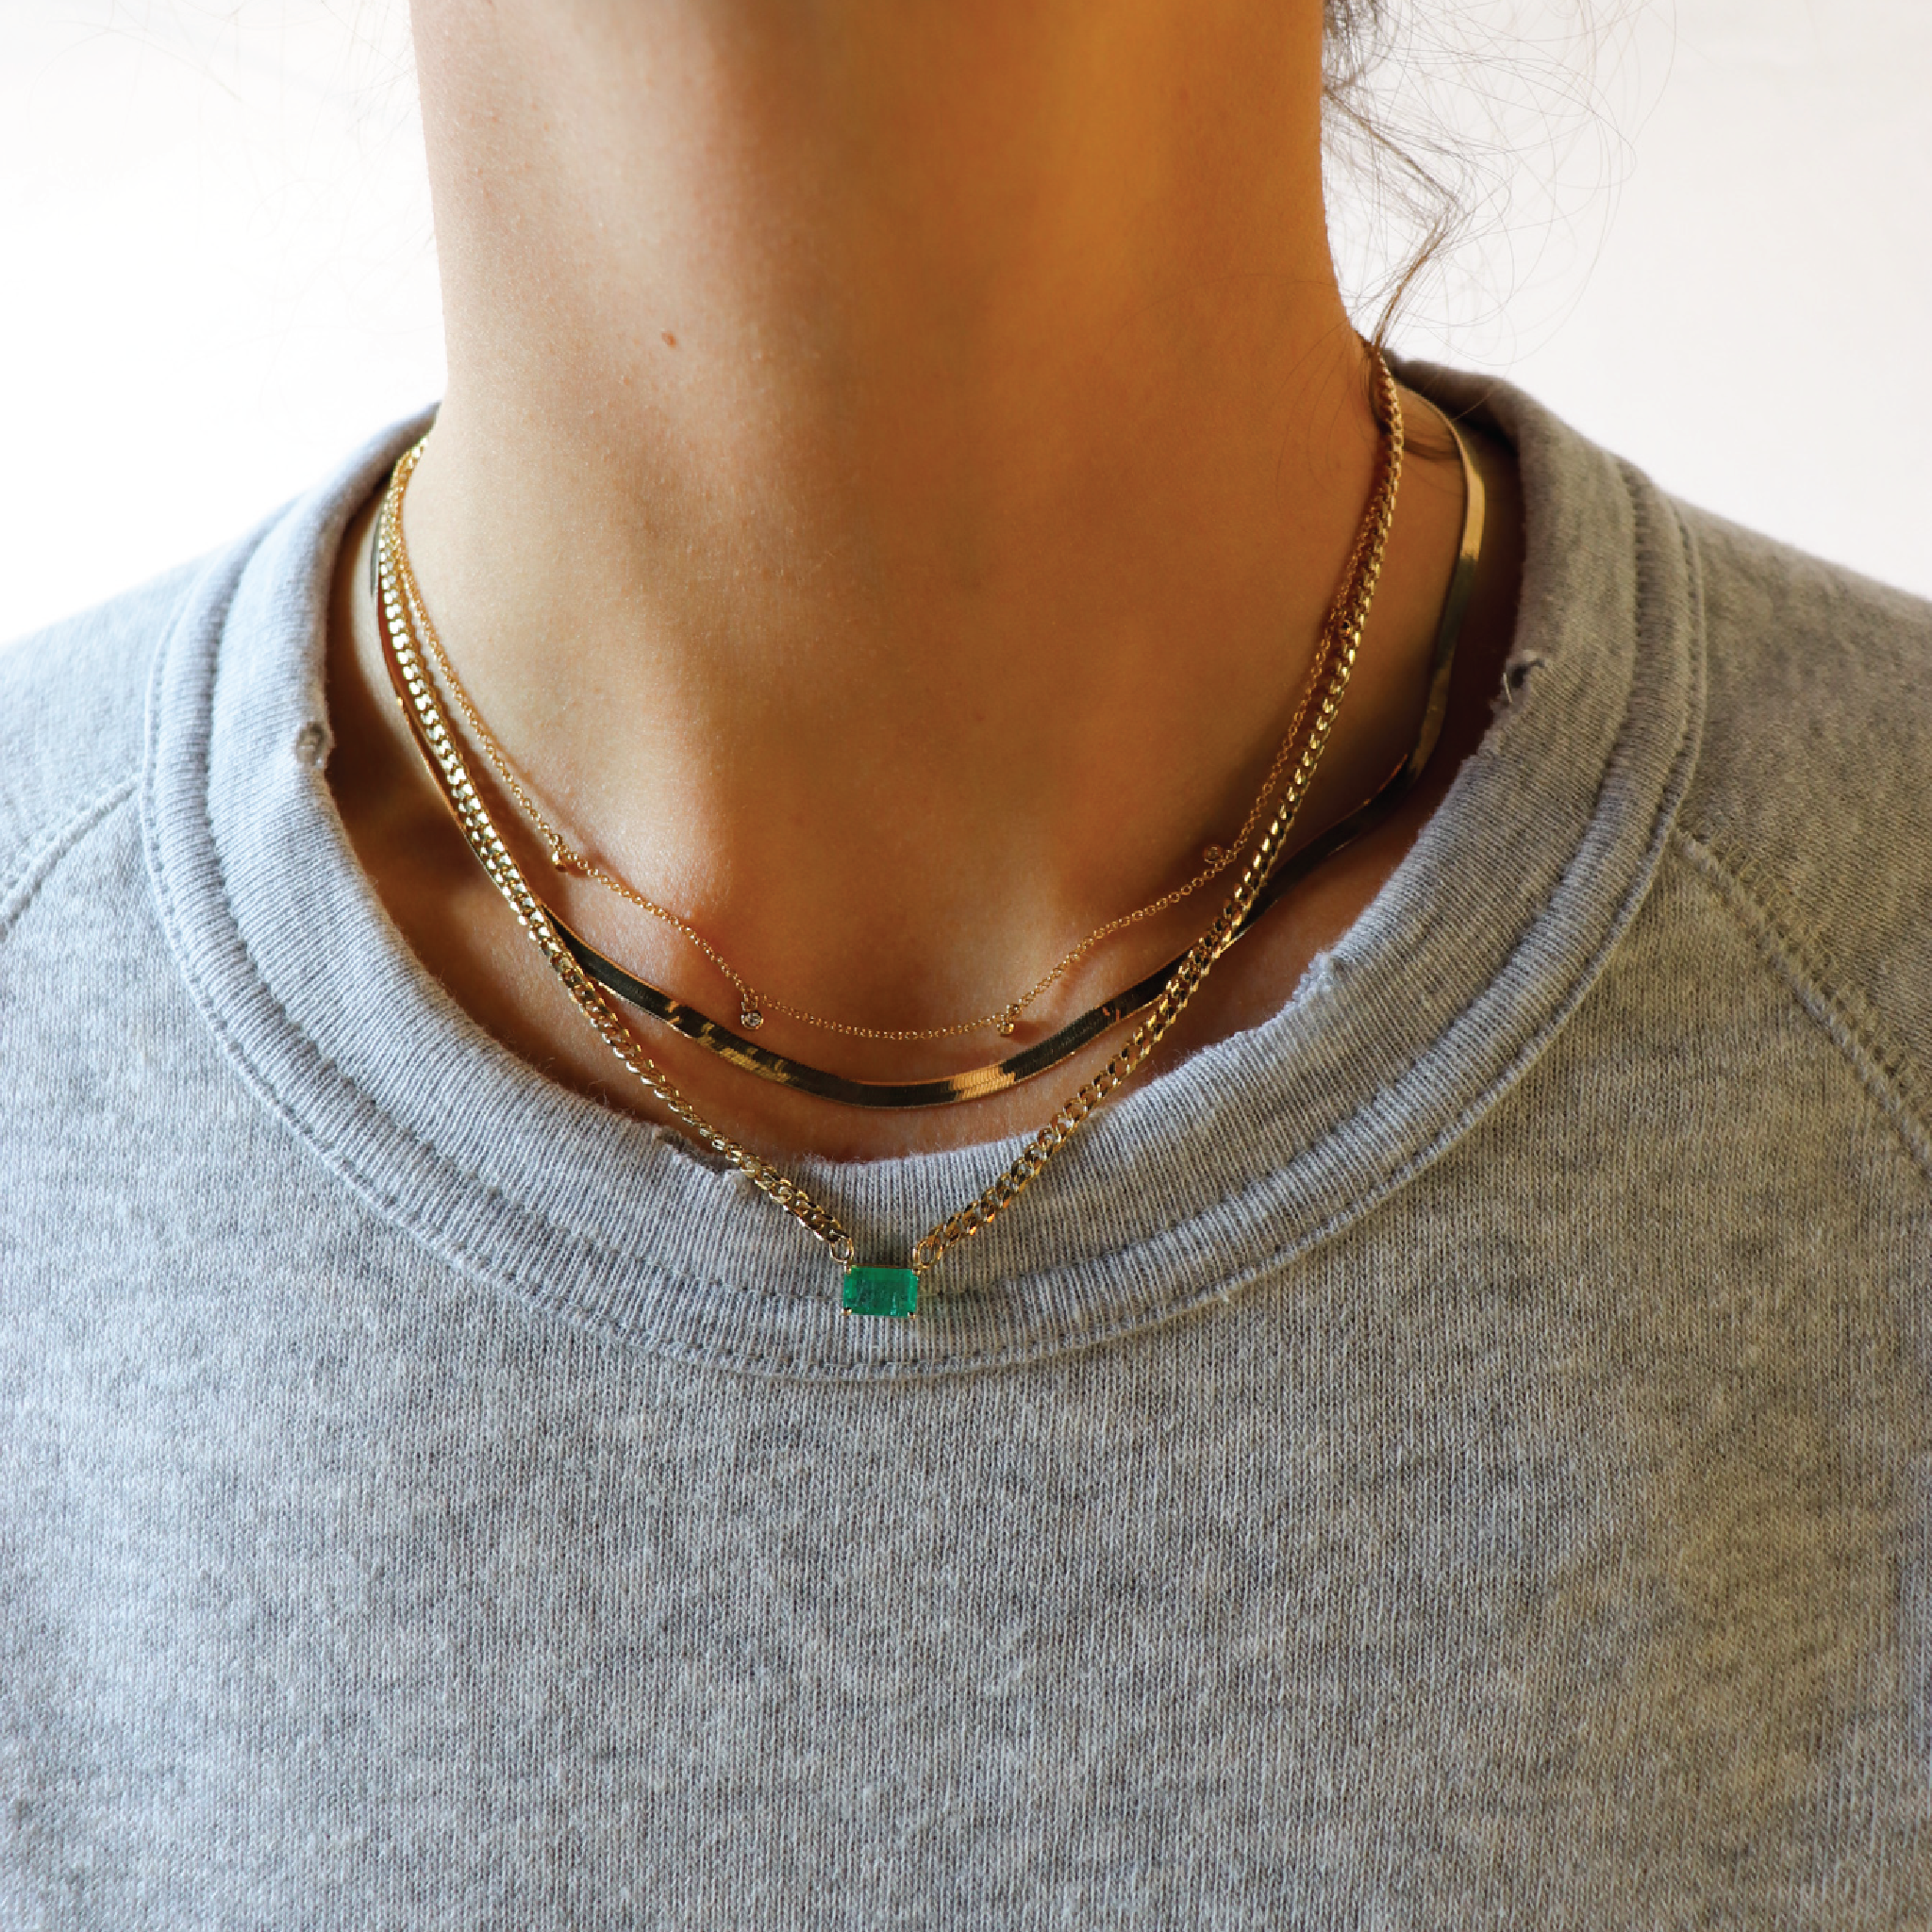 Emerald Curb Chain Necklace